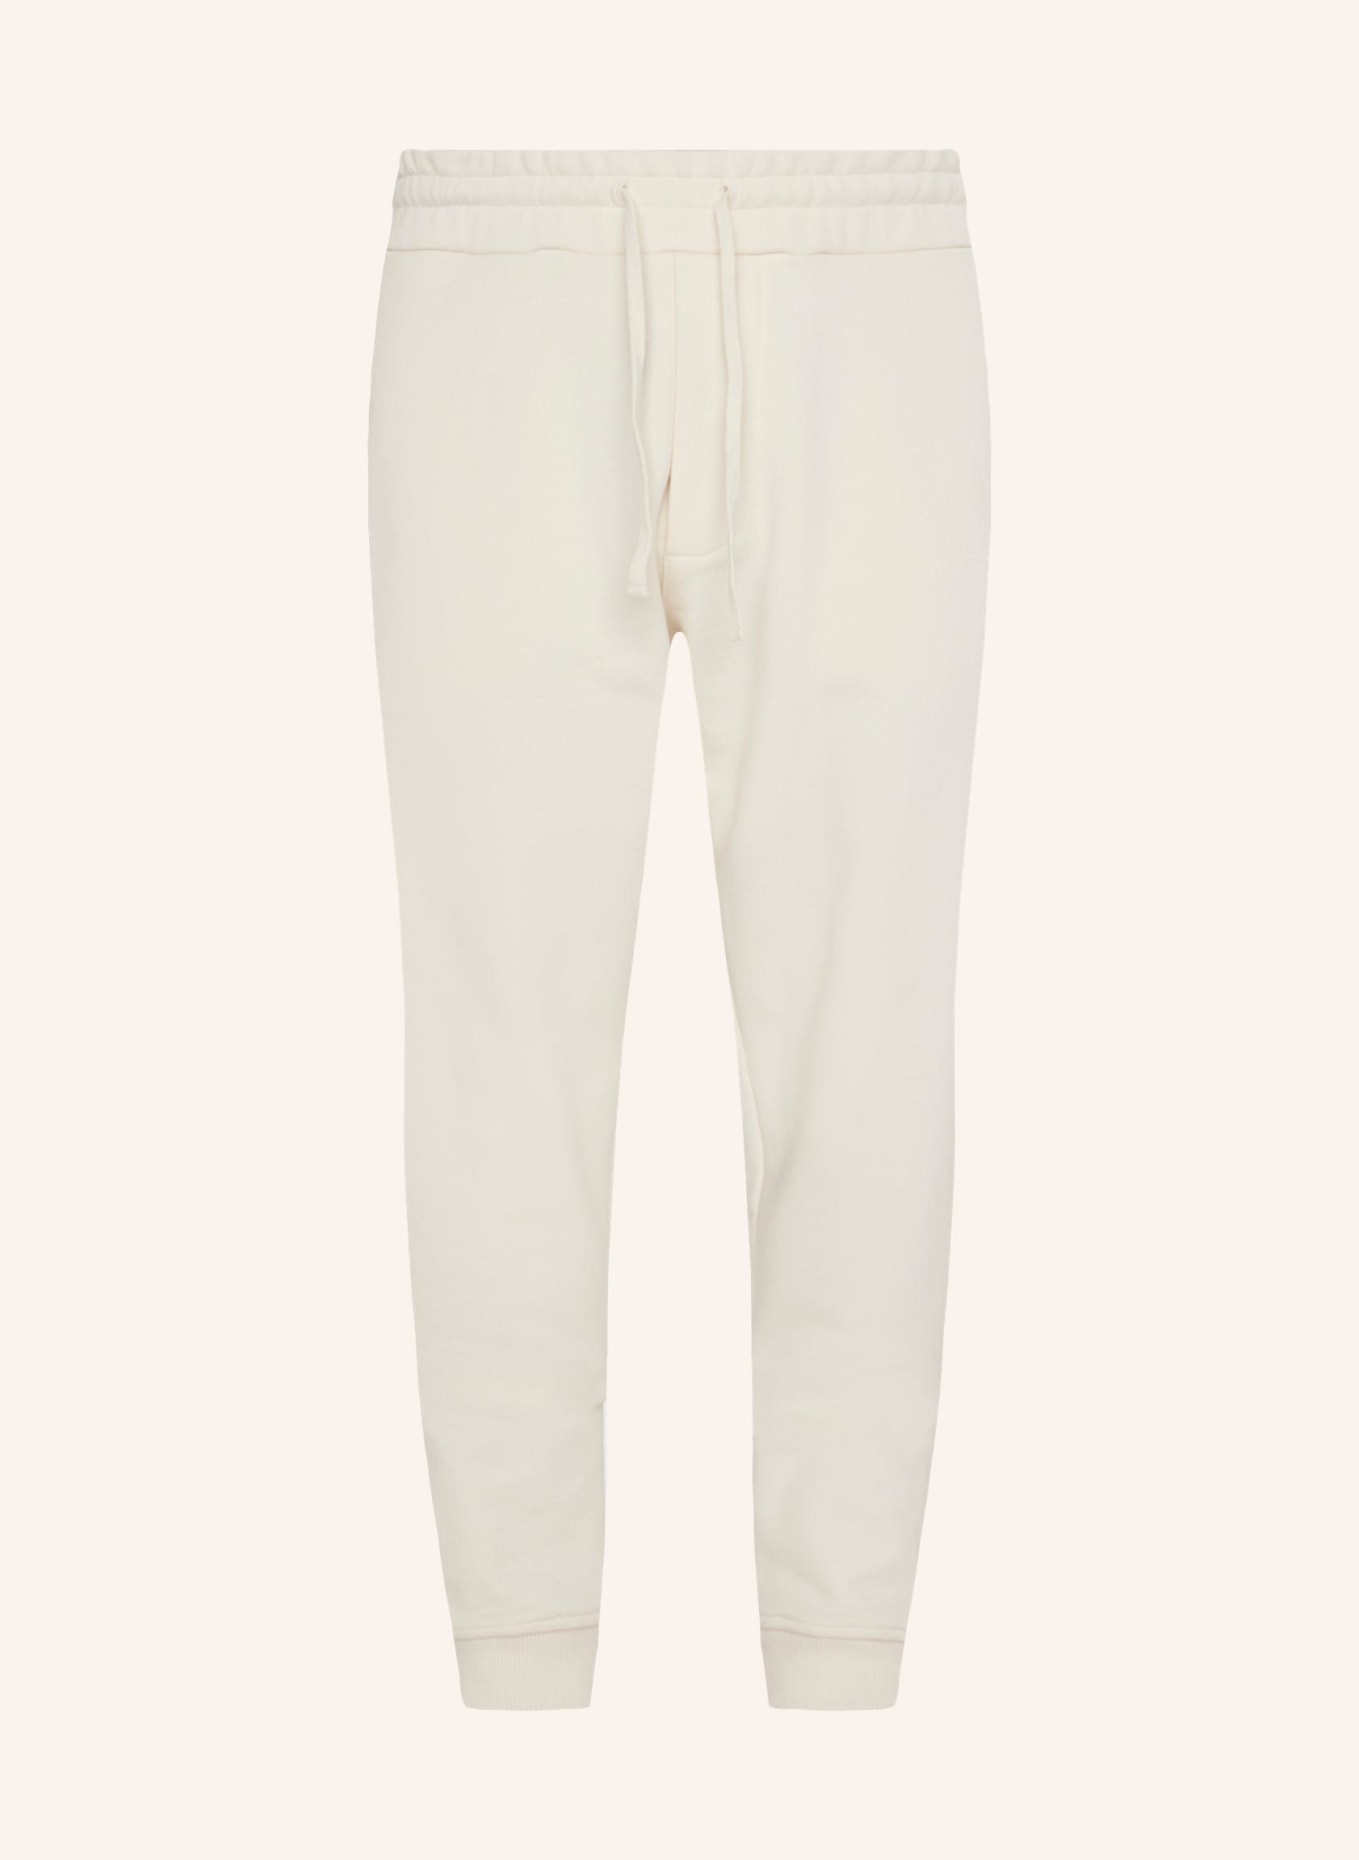 7 for all mankind Pants SWEATPANTS, Farbe: WEISS (Bild 1)